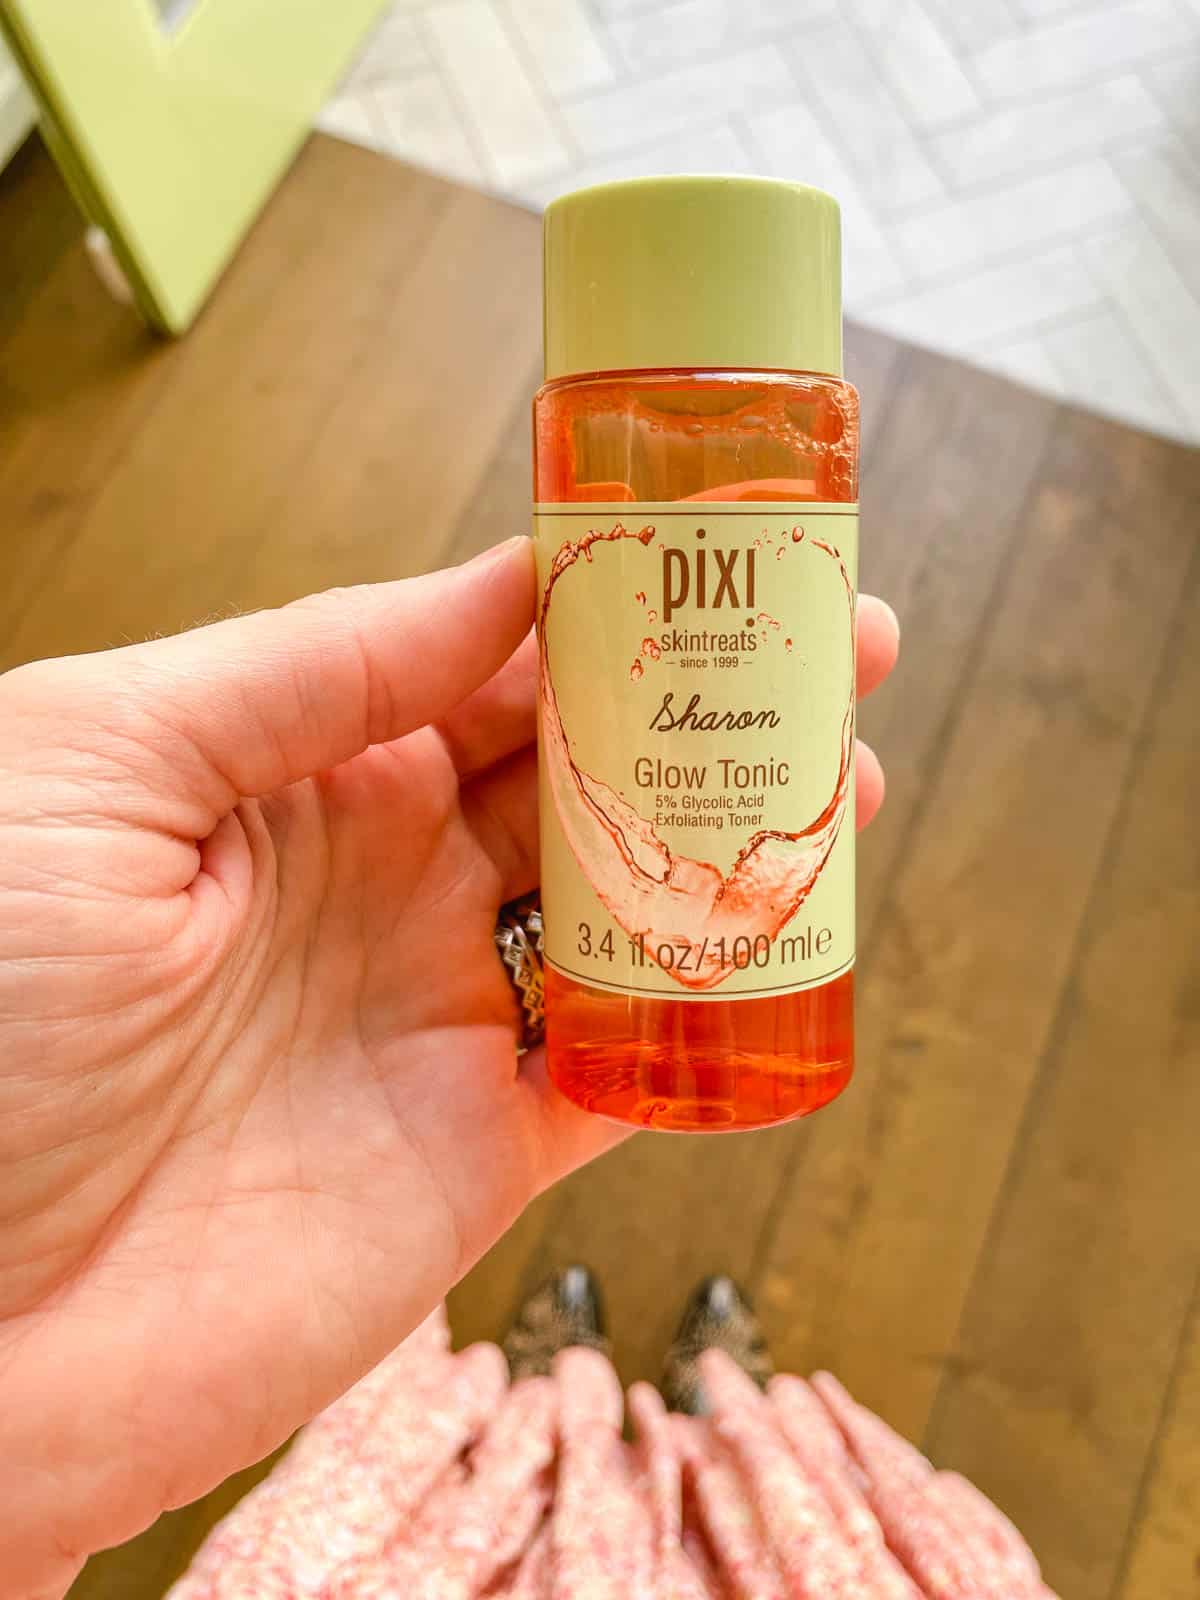 Woman holding a personalized bottle of Pixi cult classic product called Glow Tonic.